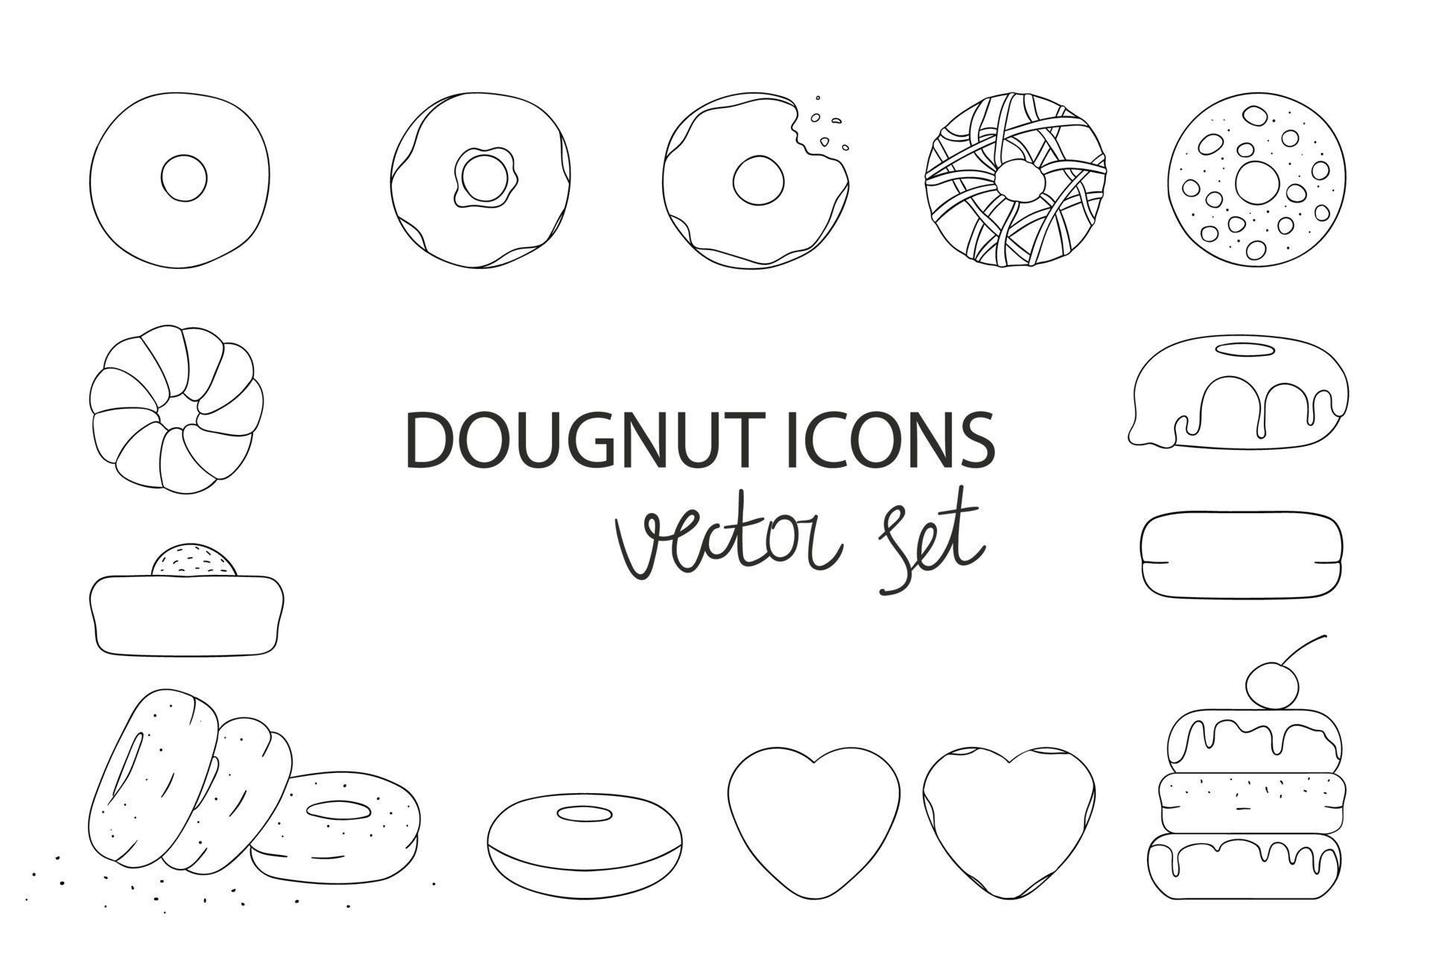 Vector illustration of black and white doughnuts. Donuts set. Linear art collection of sweet bakery goods. Graphic drawing of cakes